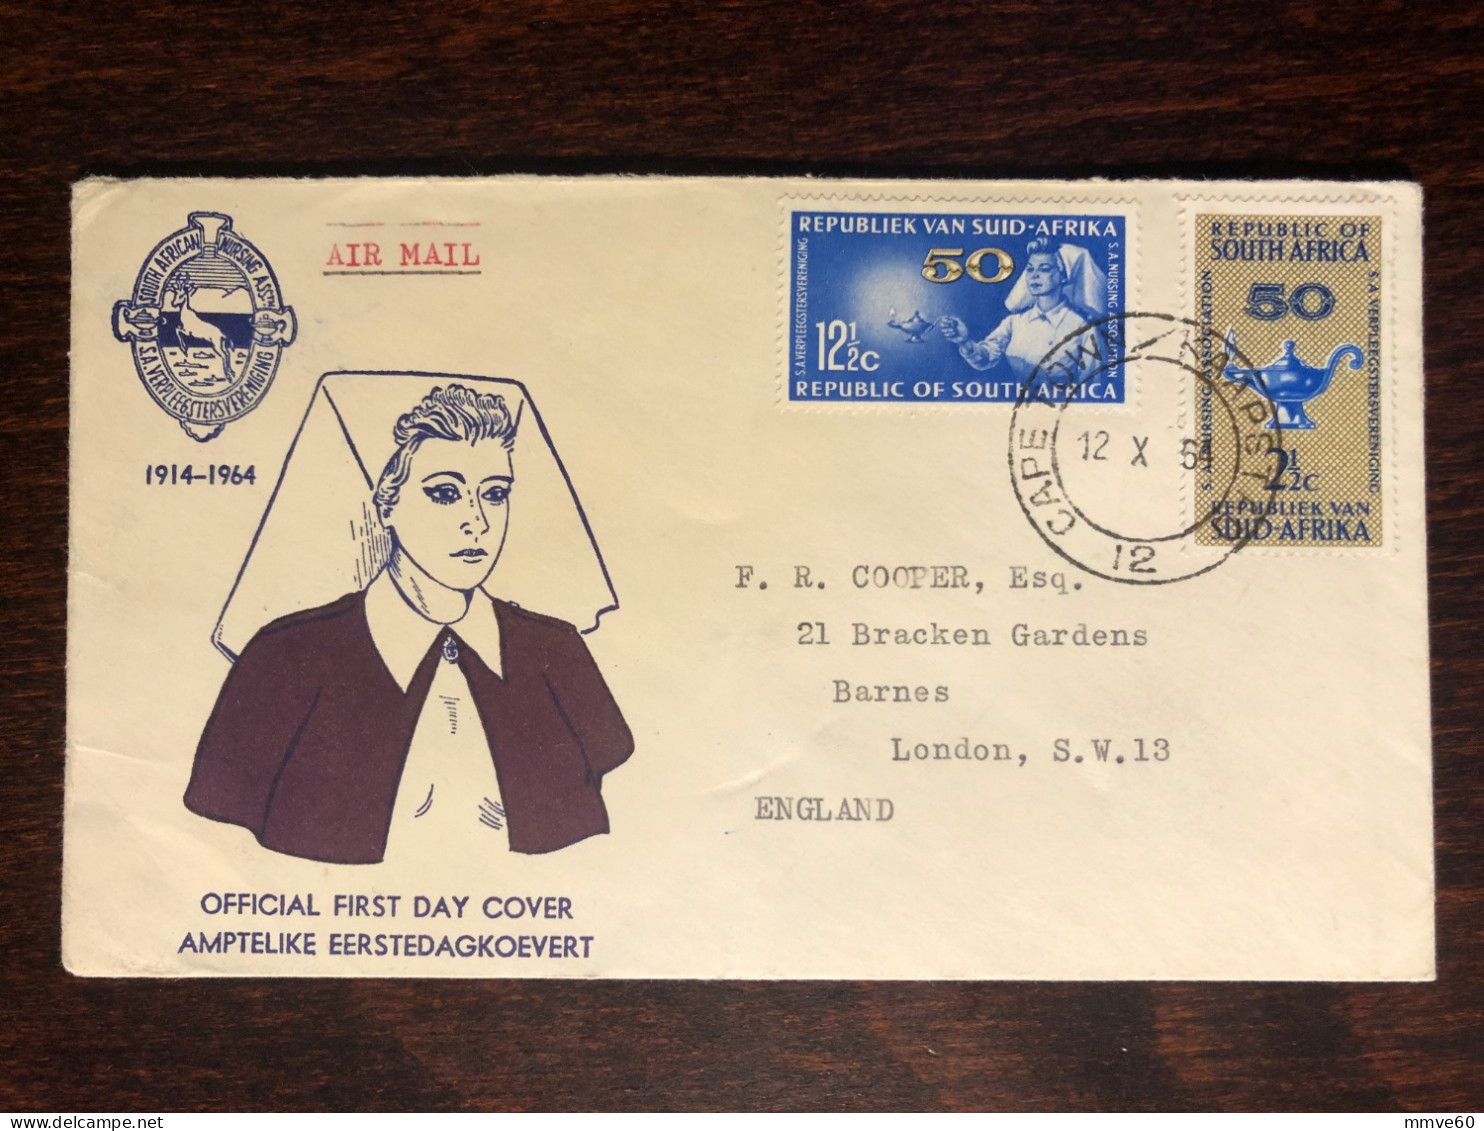 SOUTH AFRICA FDC COVER 1964 YEAR NURSES HEALTH MEDICINE STAMPS - FDC